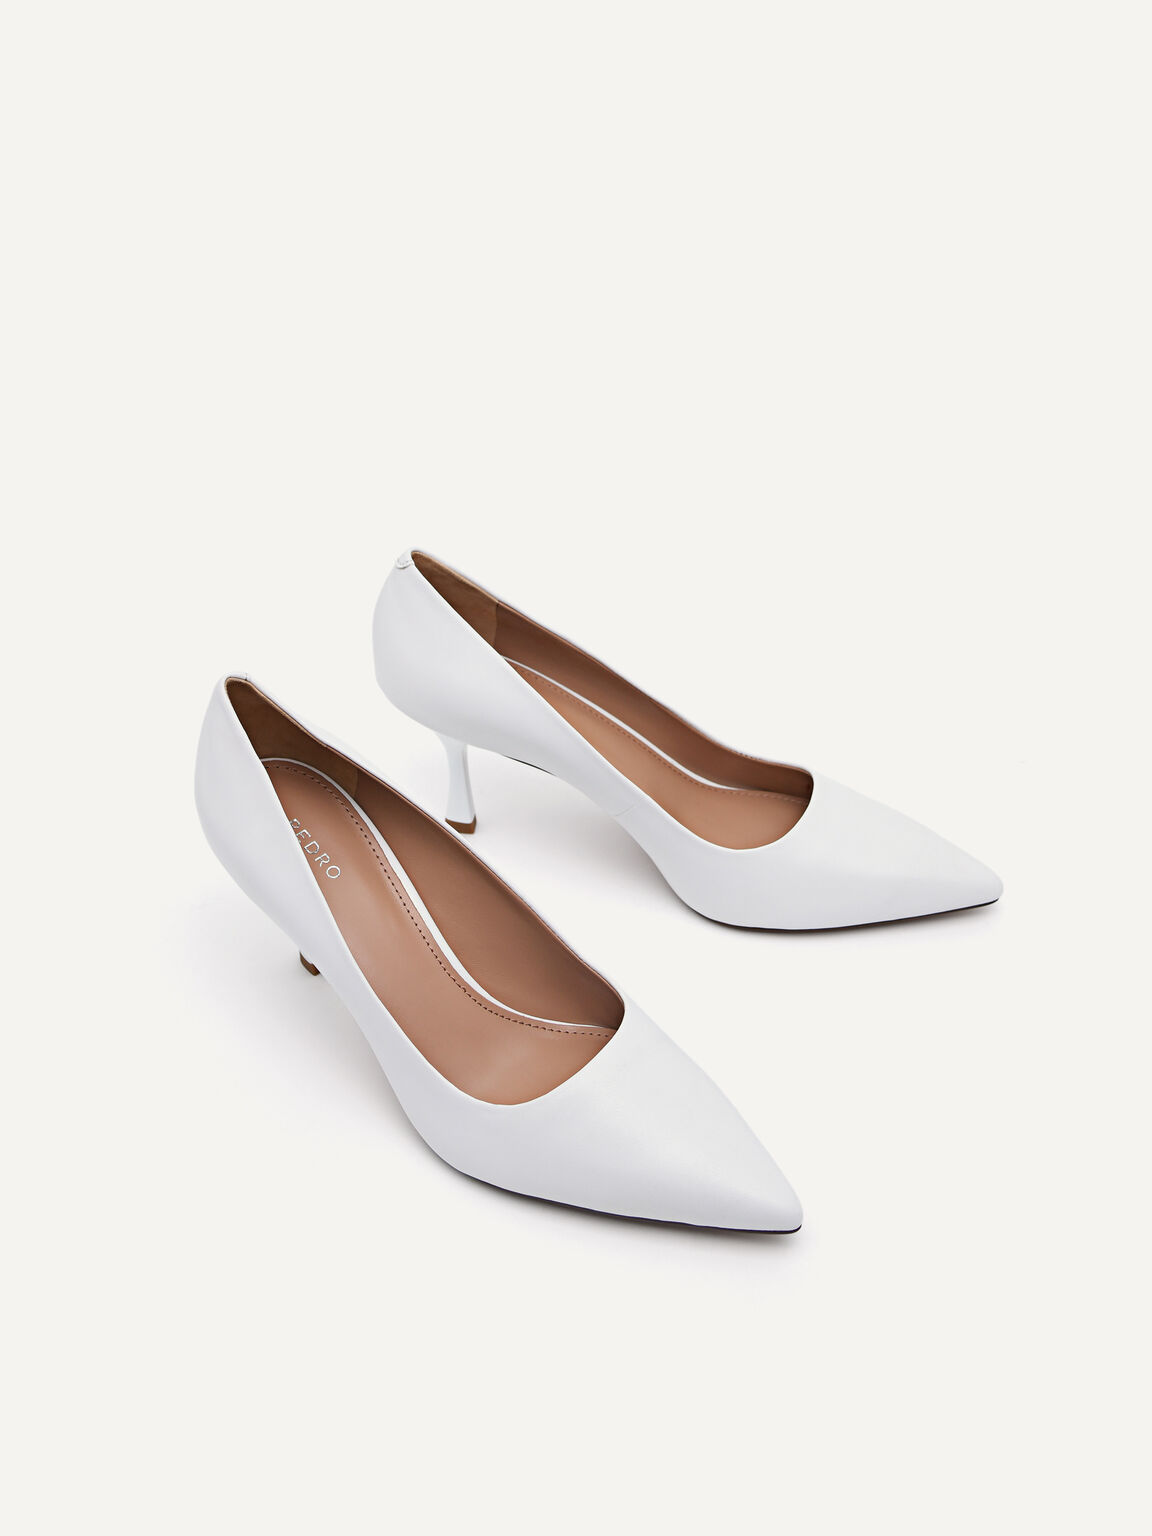 Pointed Leather Heeled Pumps, White